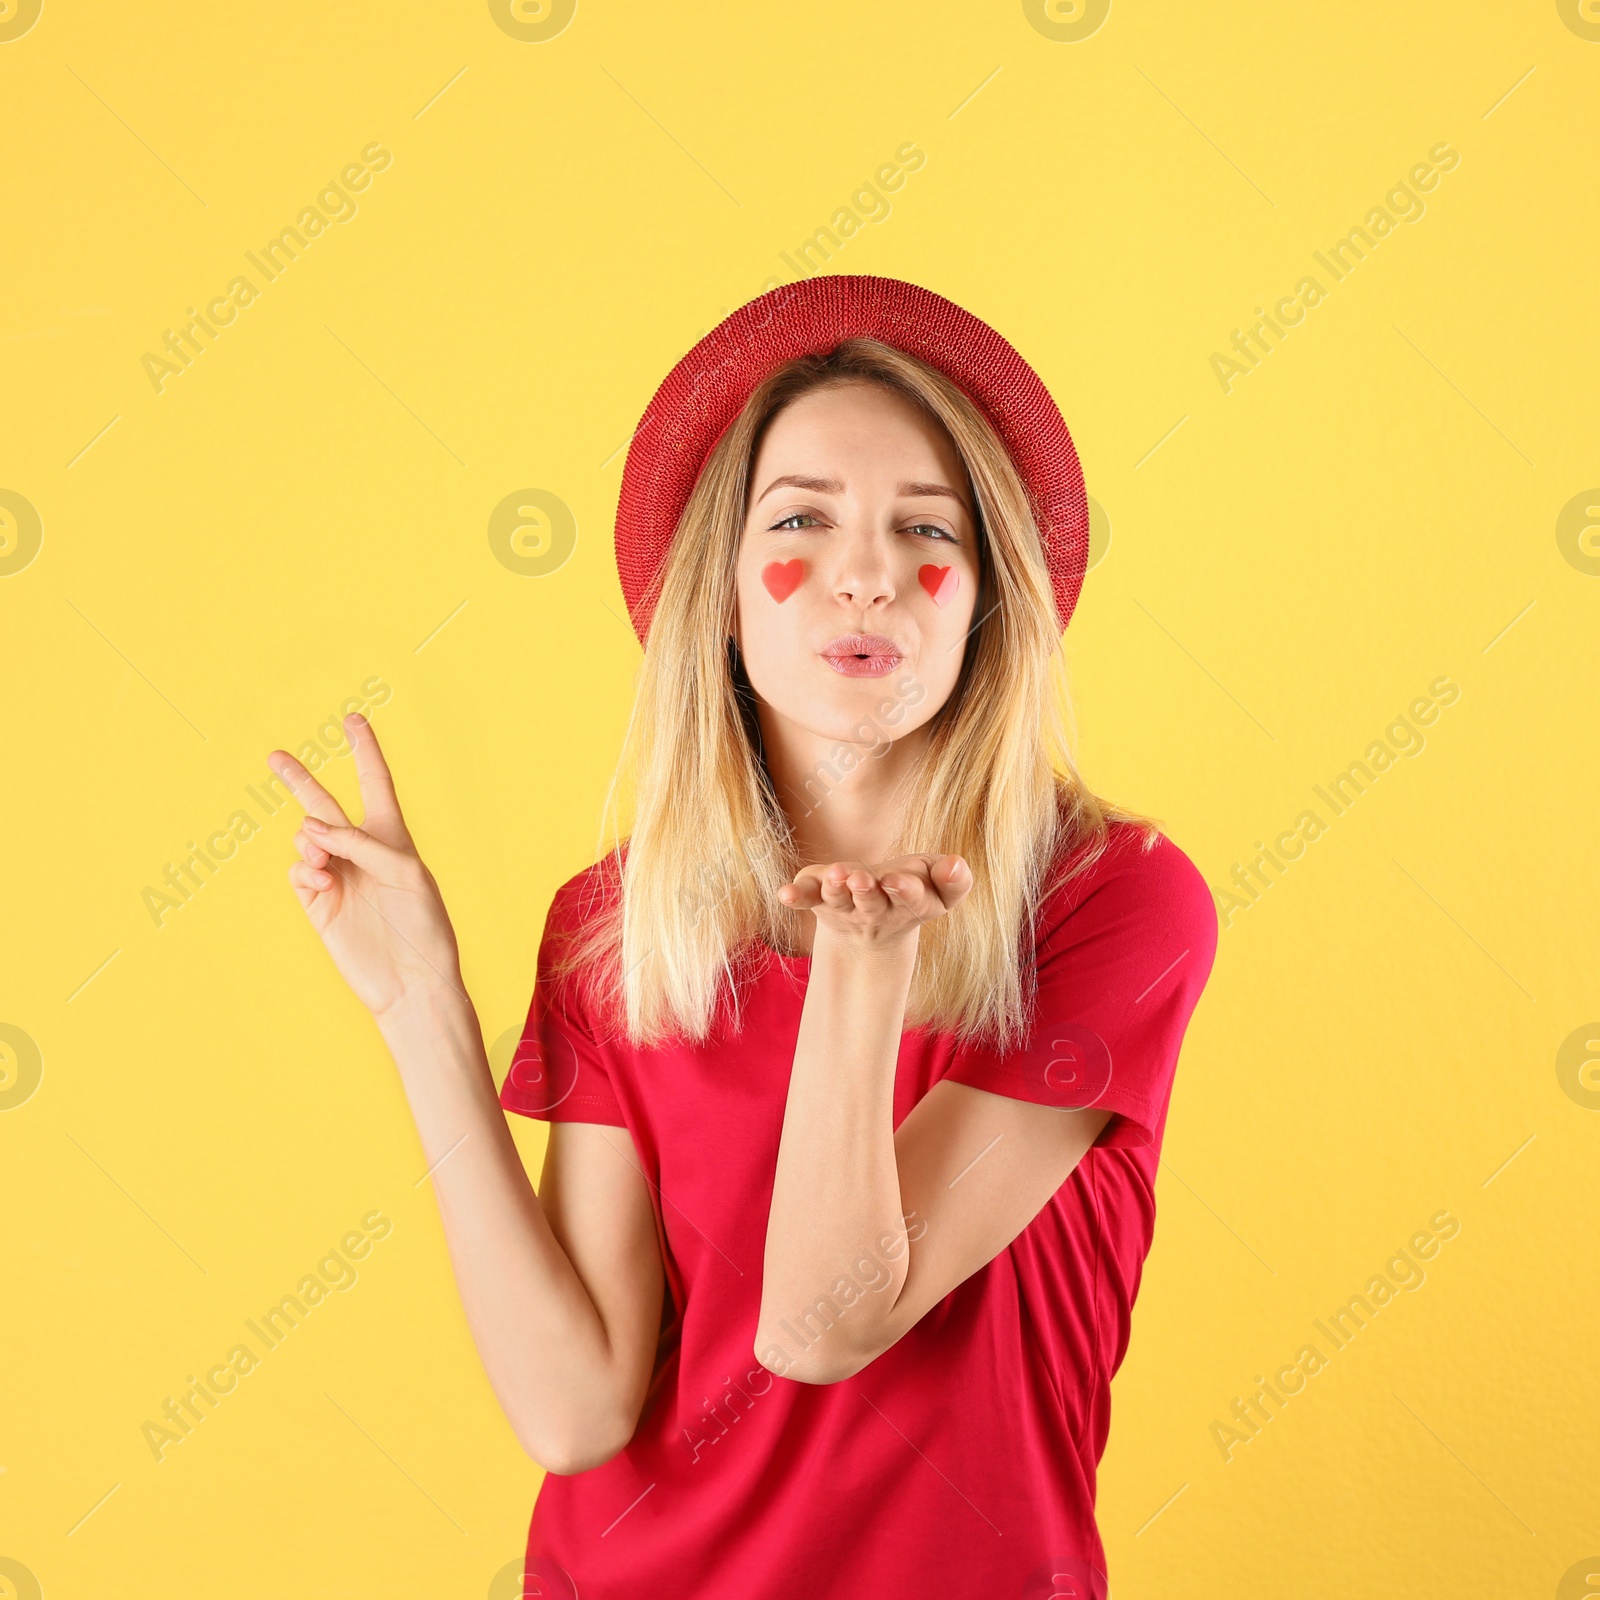 Photo of Portrait of woman with heart shaped stickers on face against color background